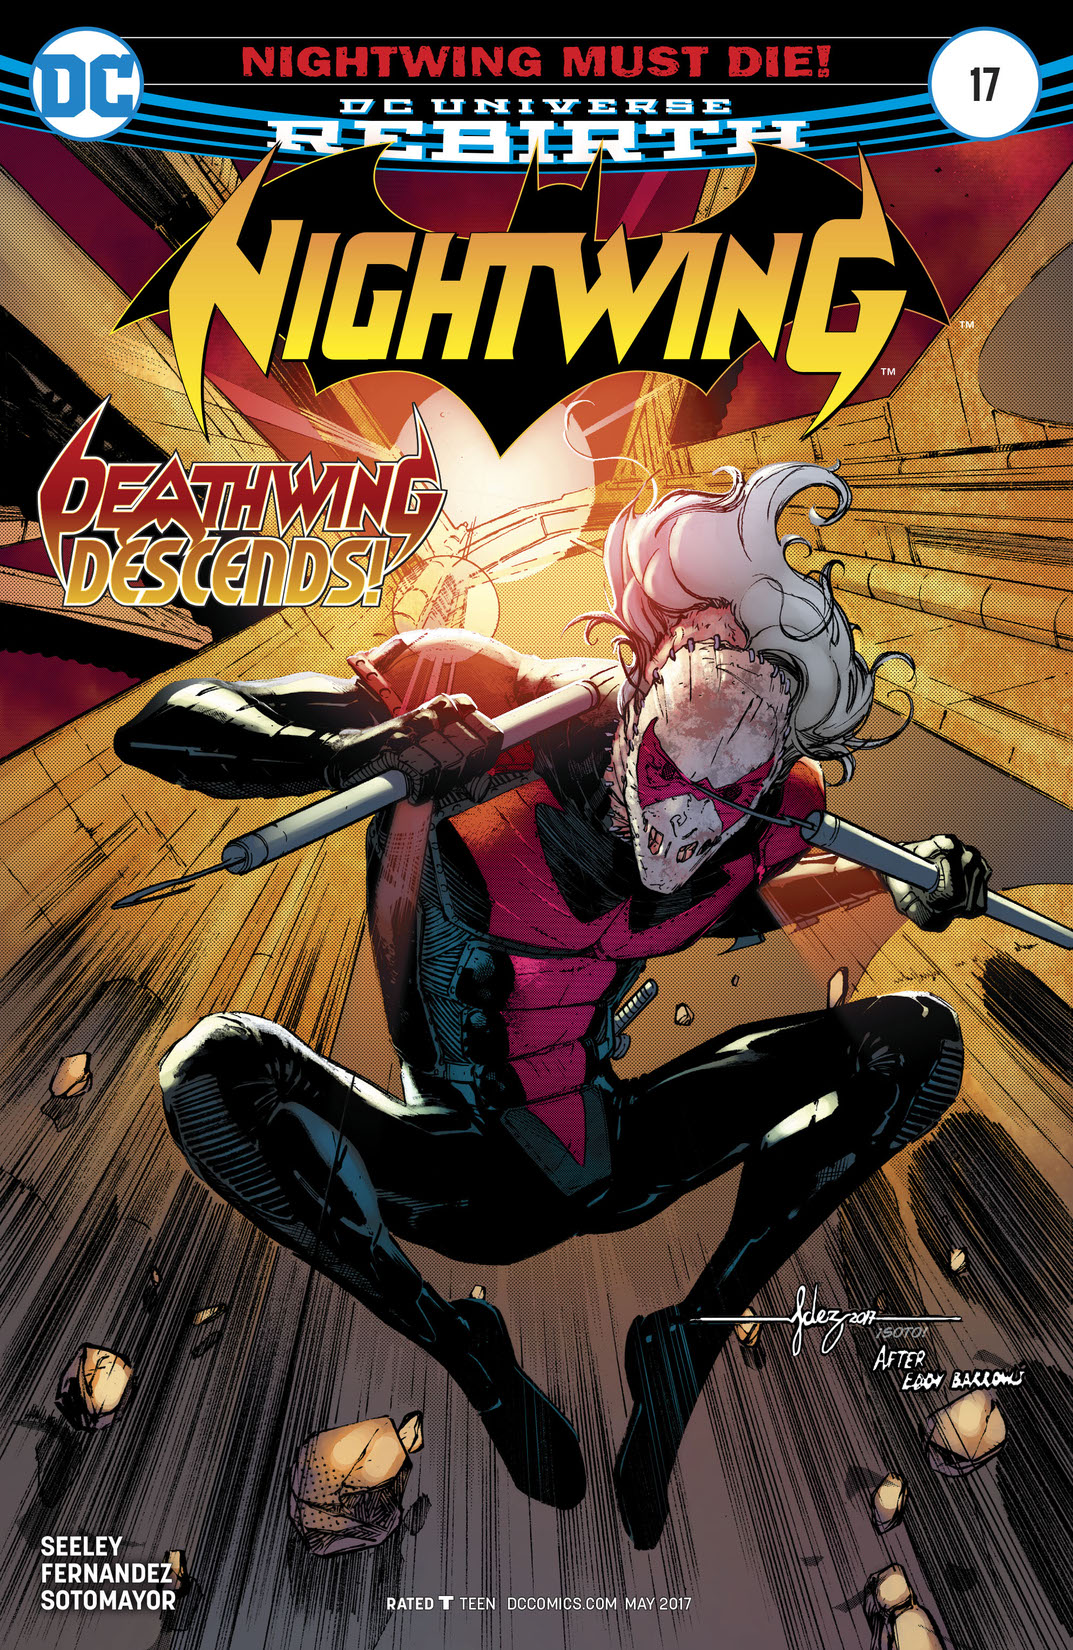 Nightwing (2016-) #17 preview images